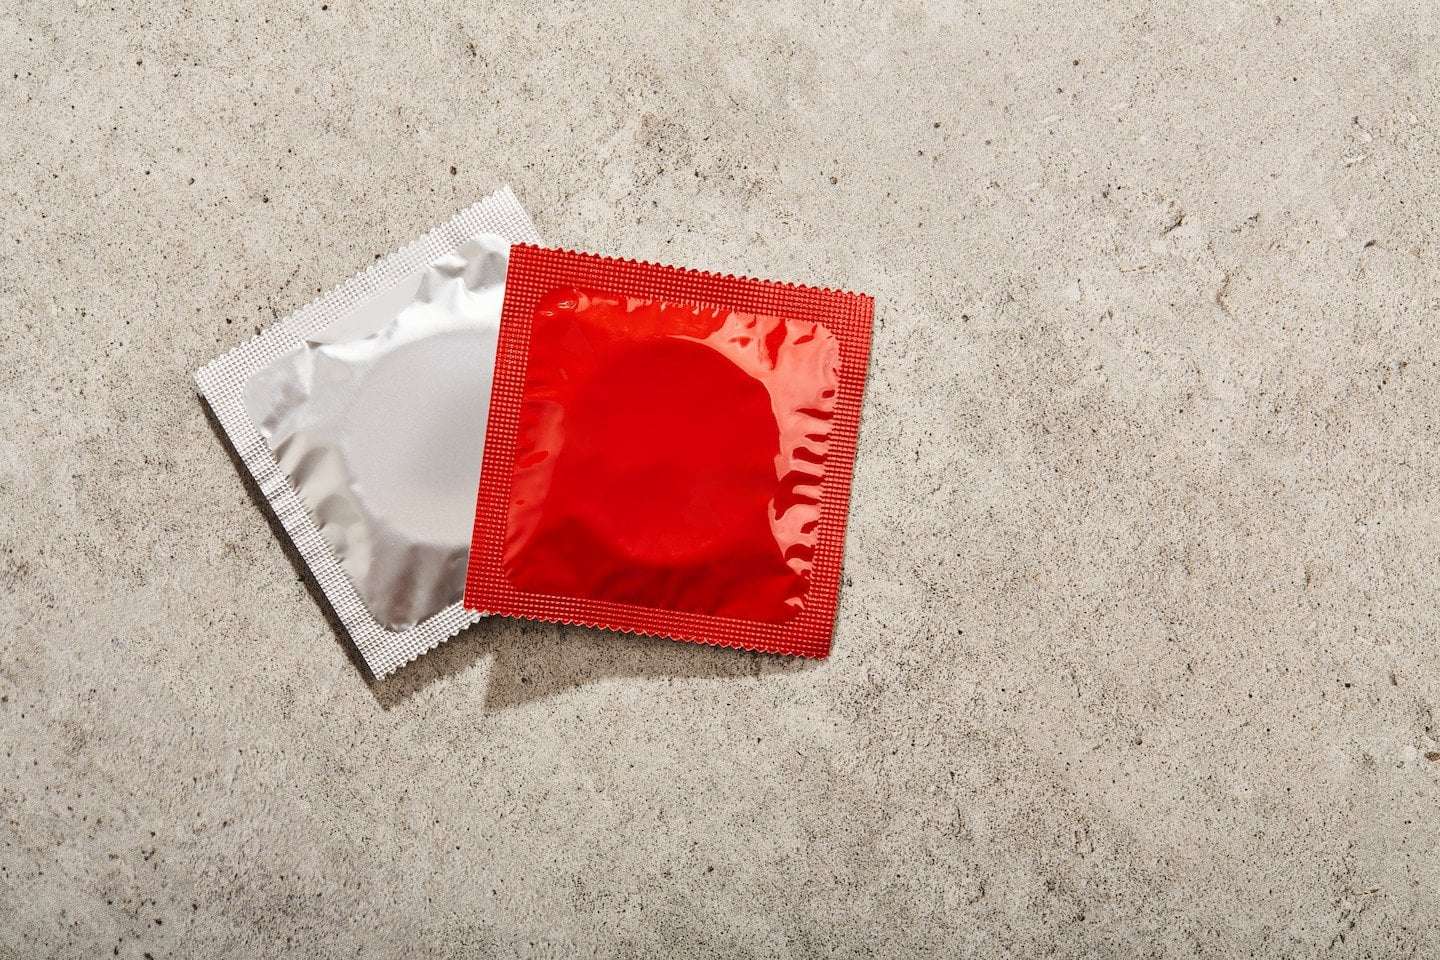 image for Man who secretly removed condom is convicted of ‘stealthing’ by Dutch court